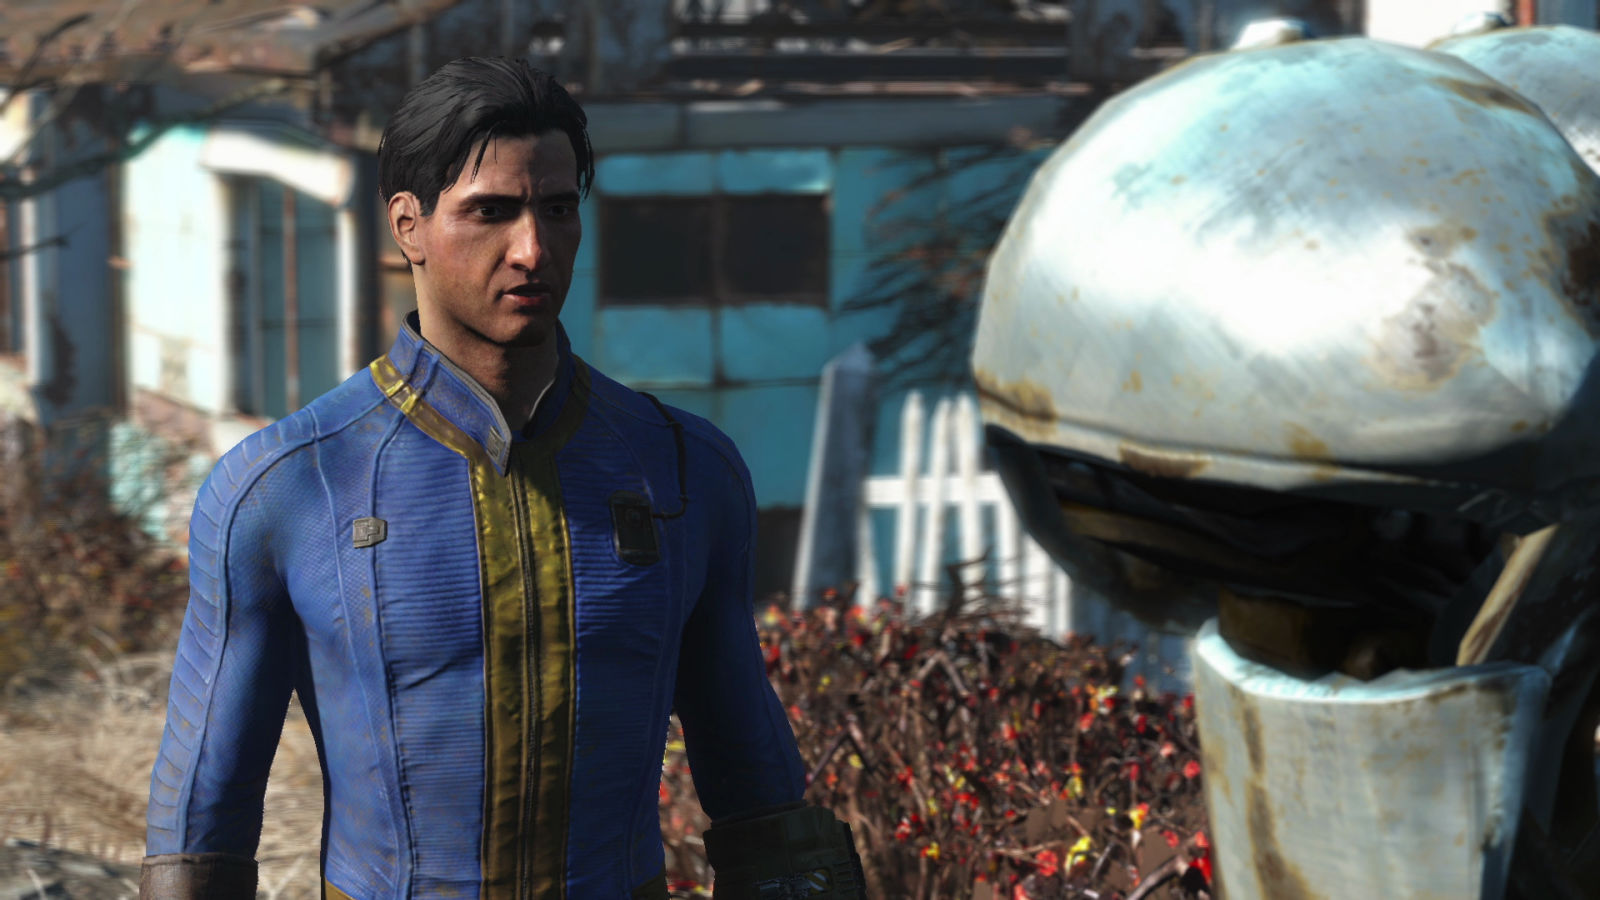 The Controversy Over Bethesda’s ‘Sport Engine’ Is Misguided